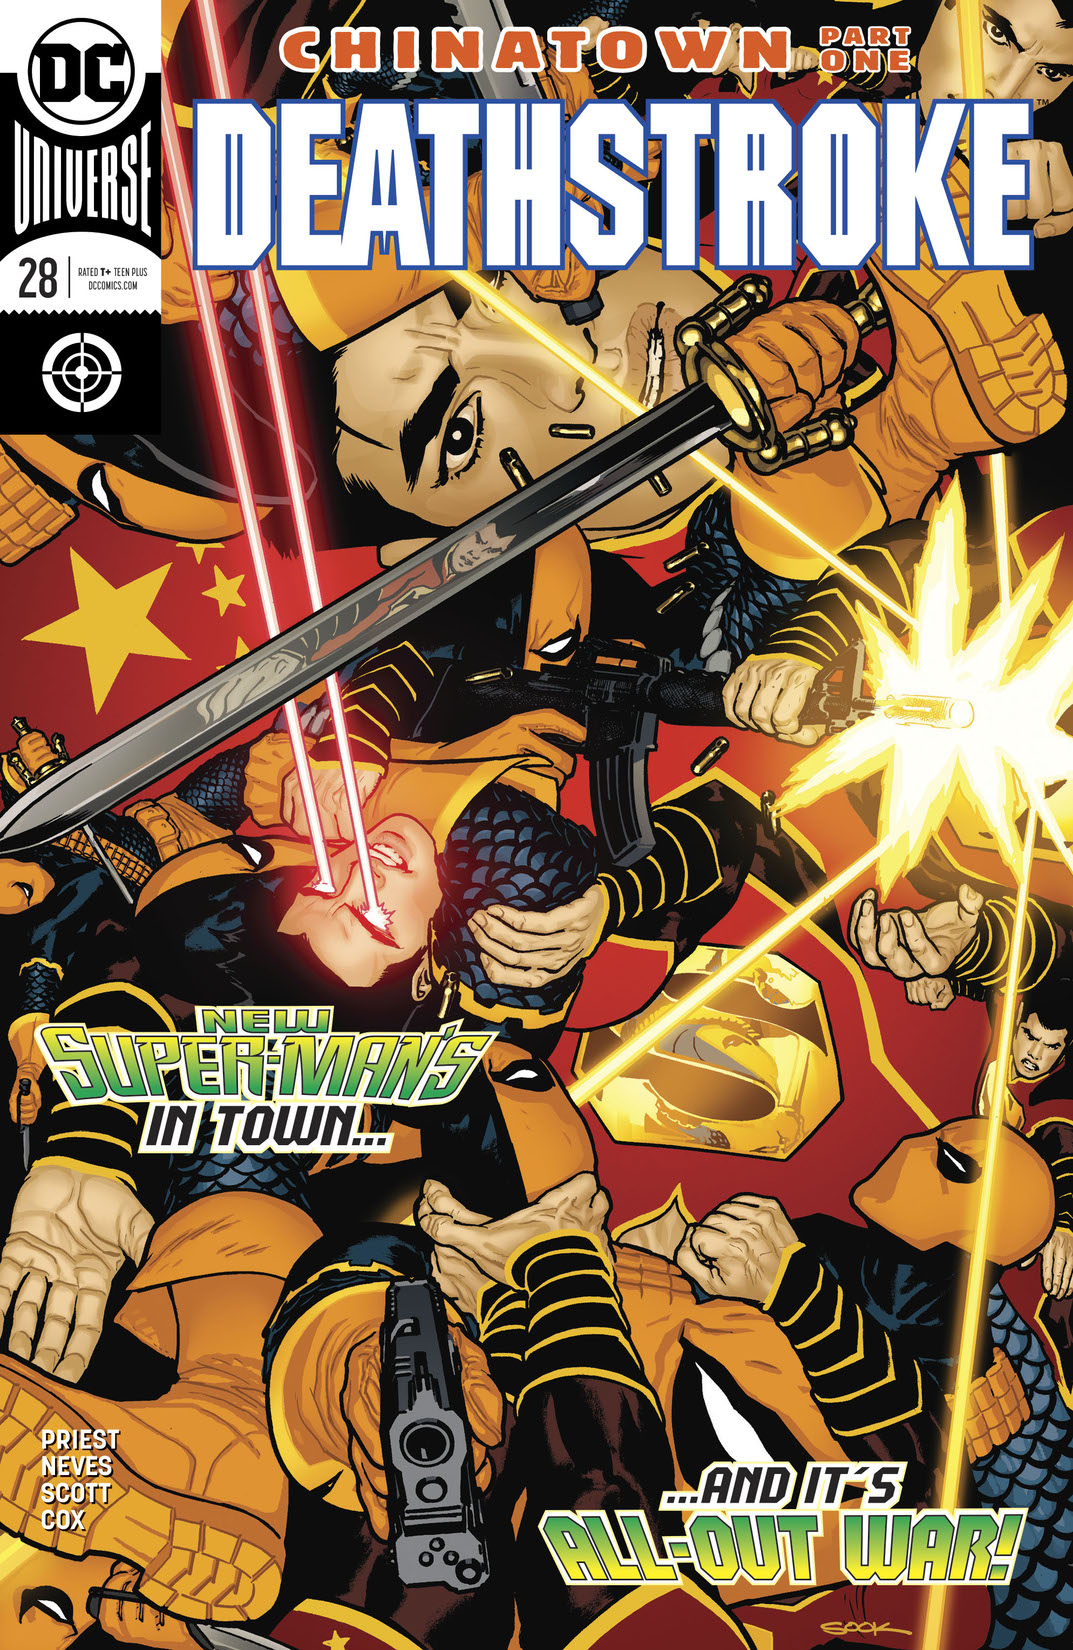 Deathstroke (2016-) #28 preview images